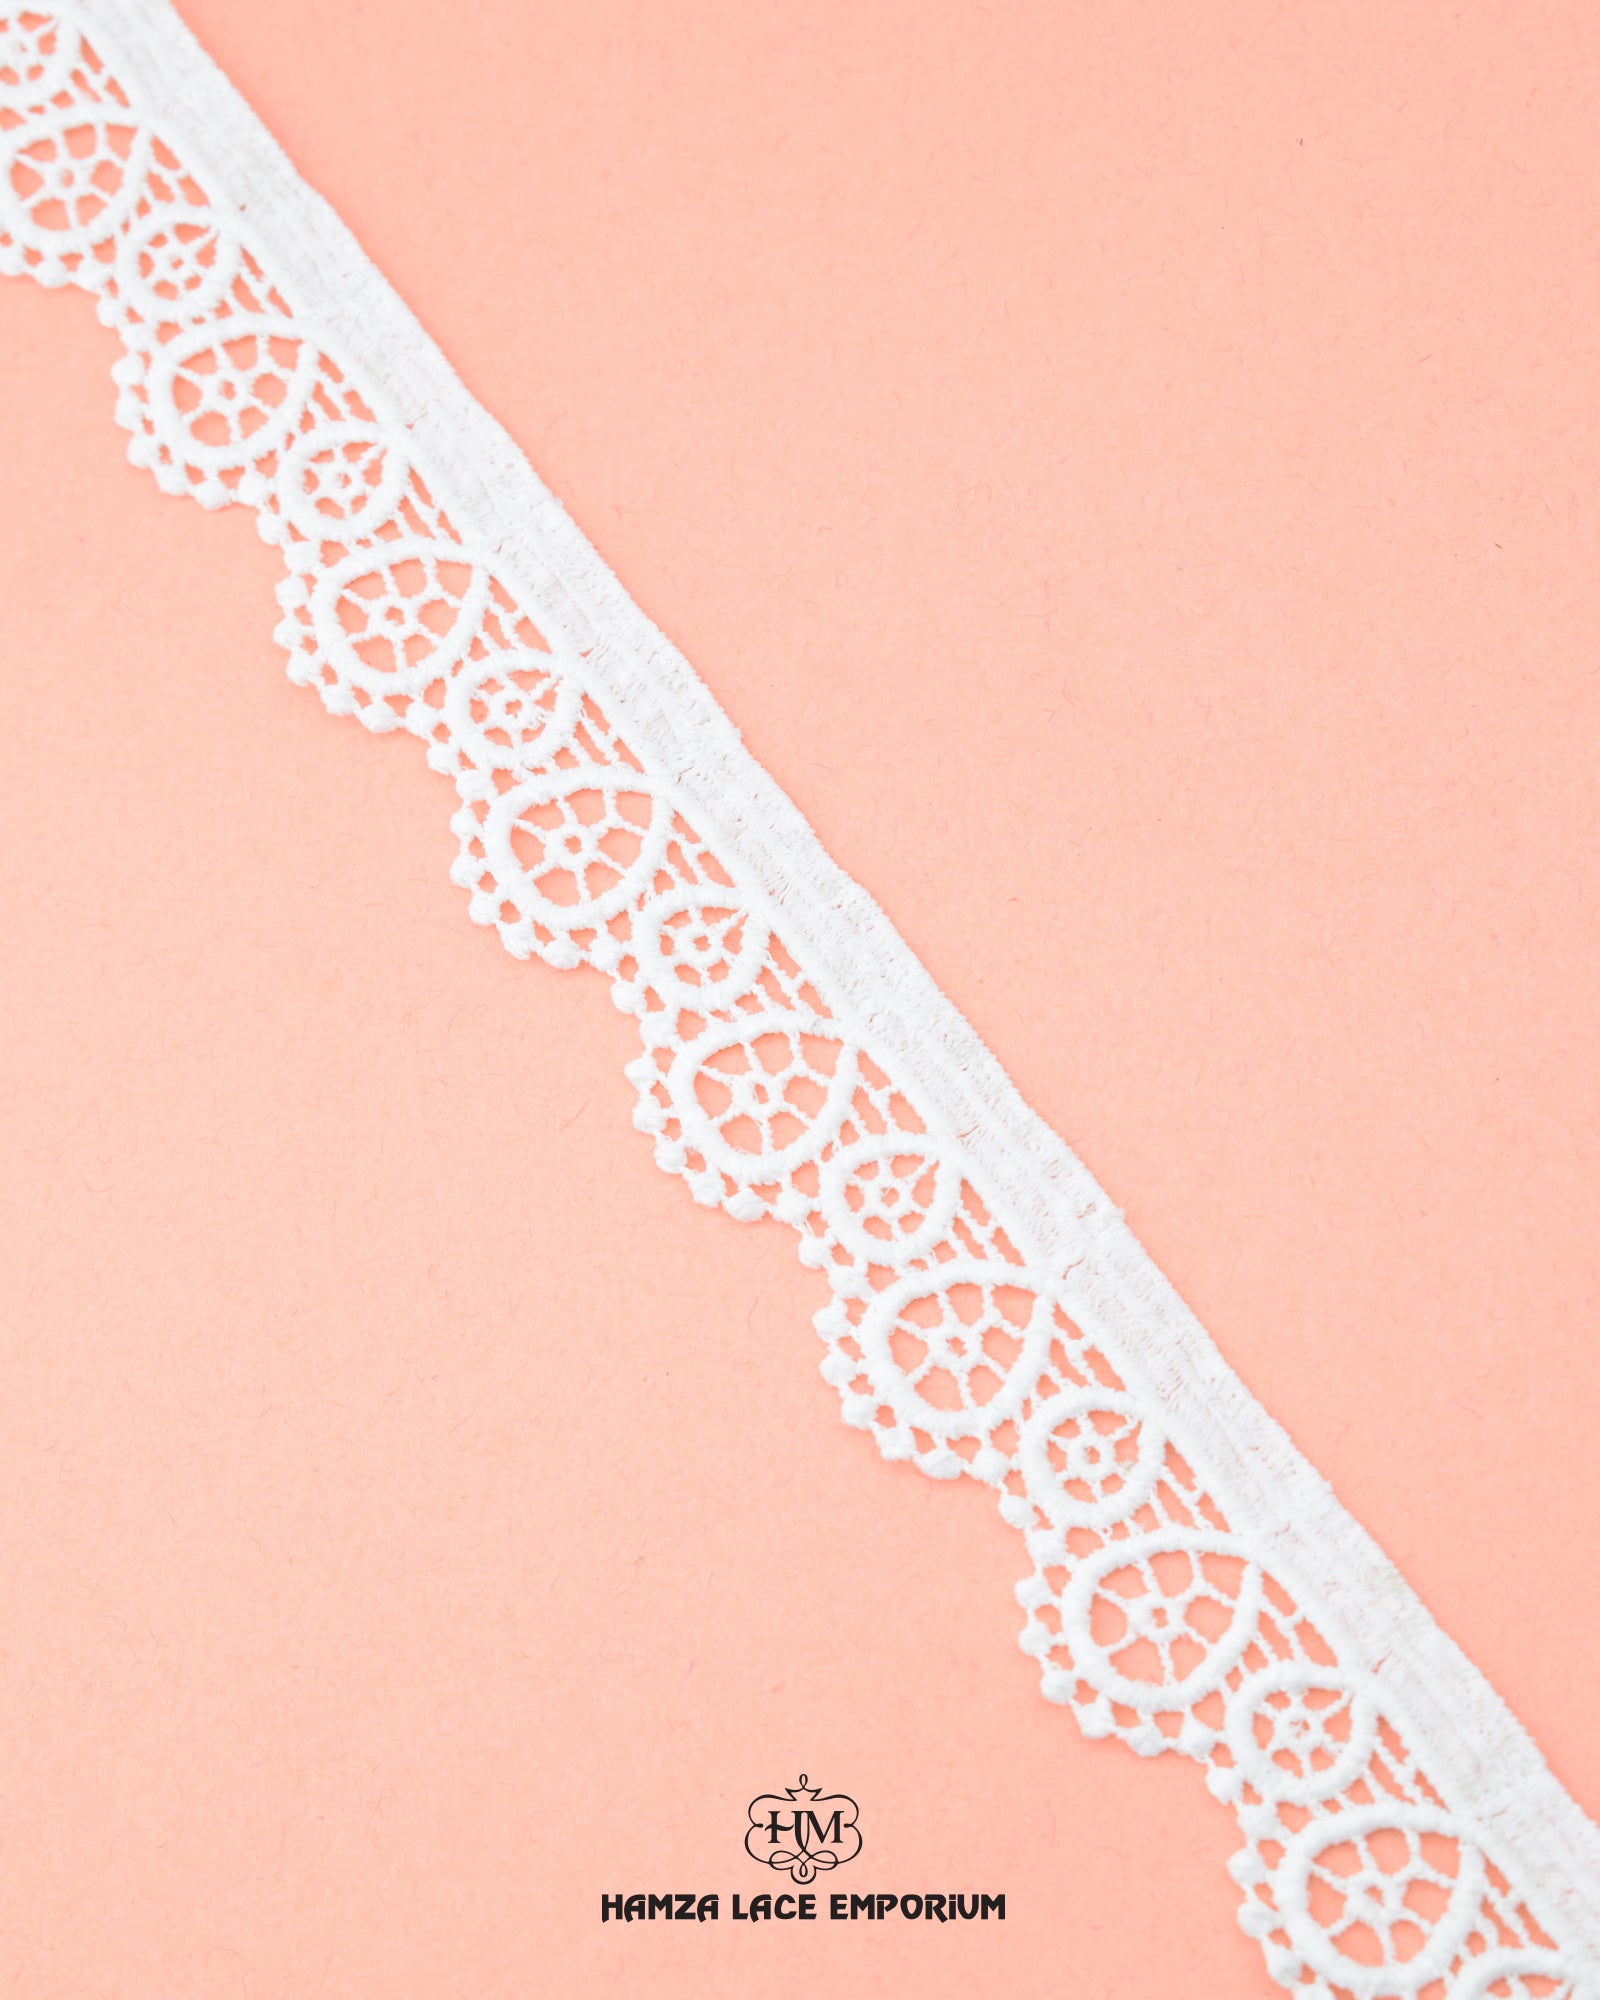 The "Edging Loop Lace 5953" with the "Hamza Lace" sign at the bottom